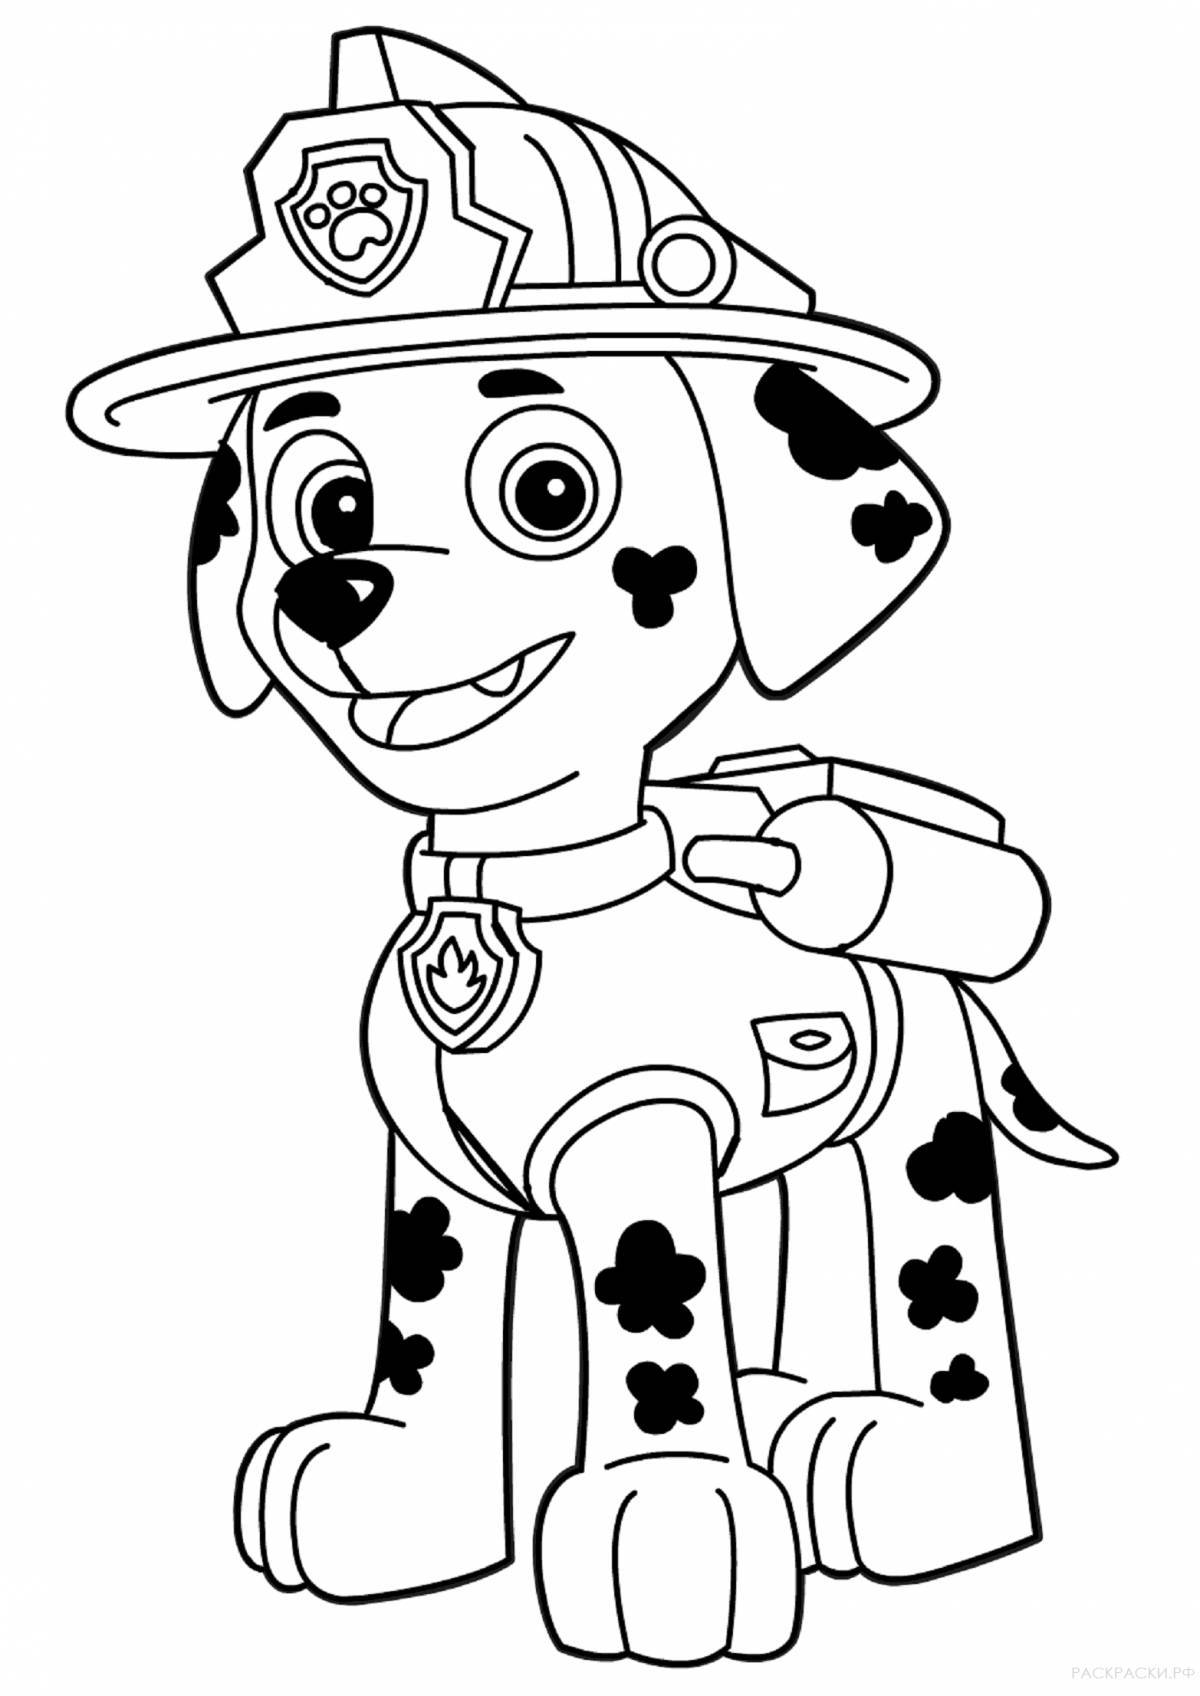 Marshal deluxe coloring book